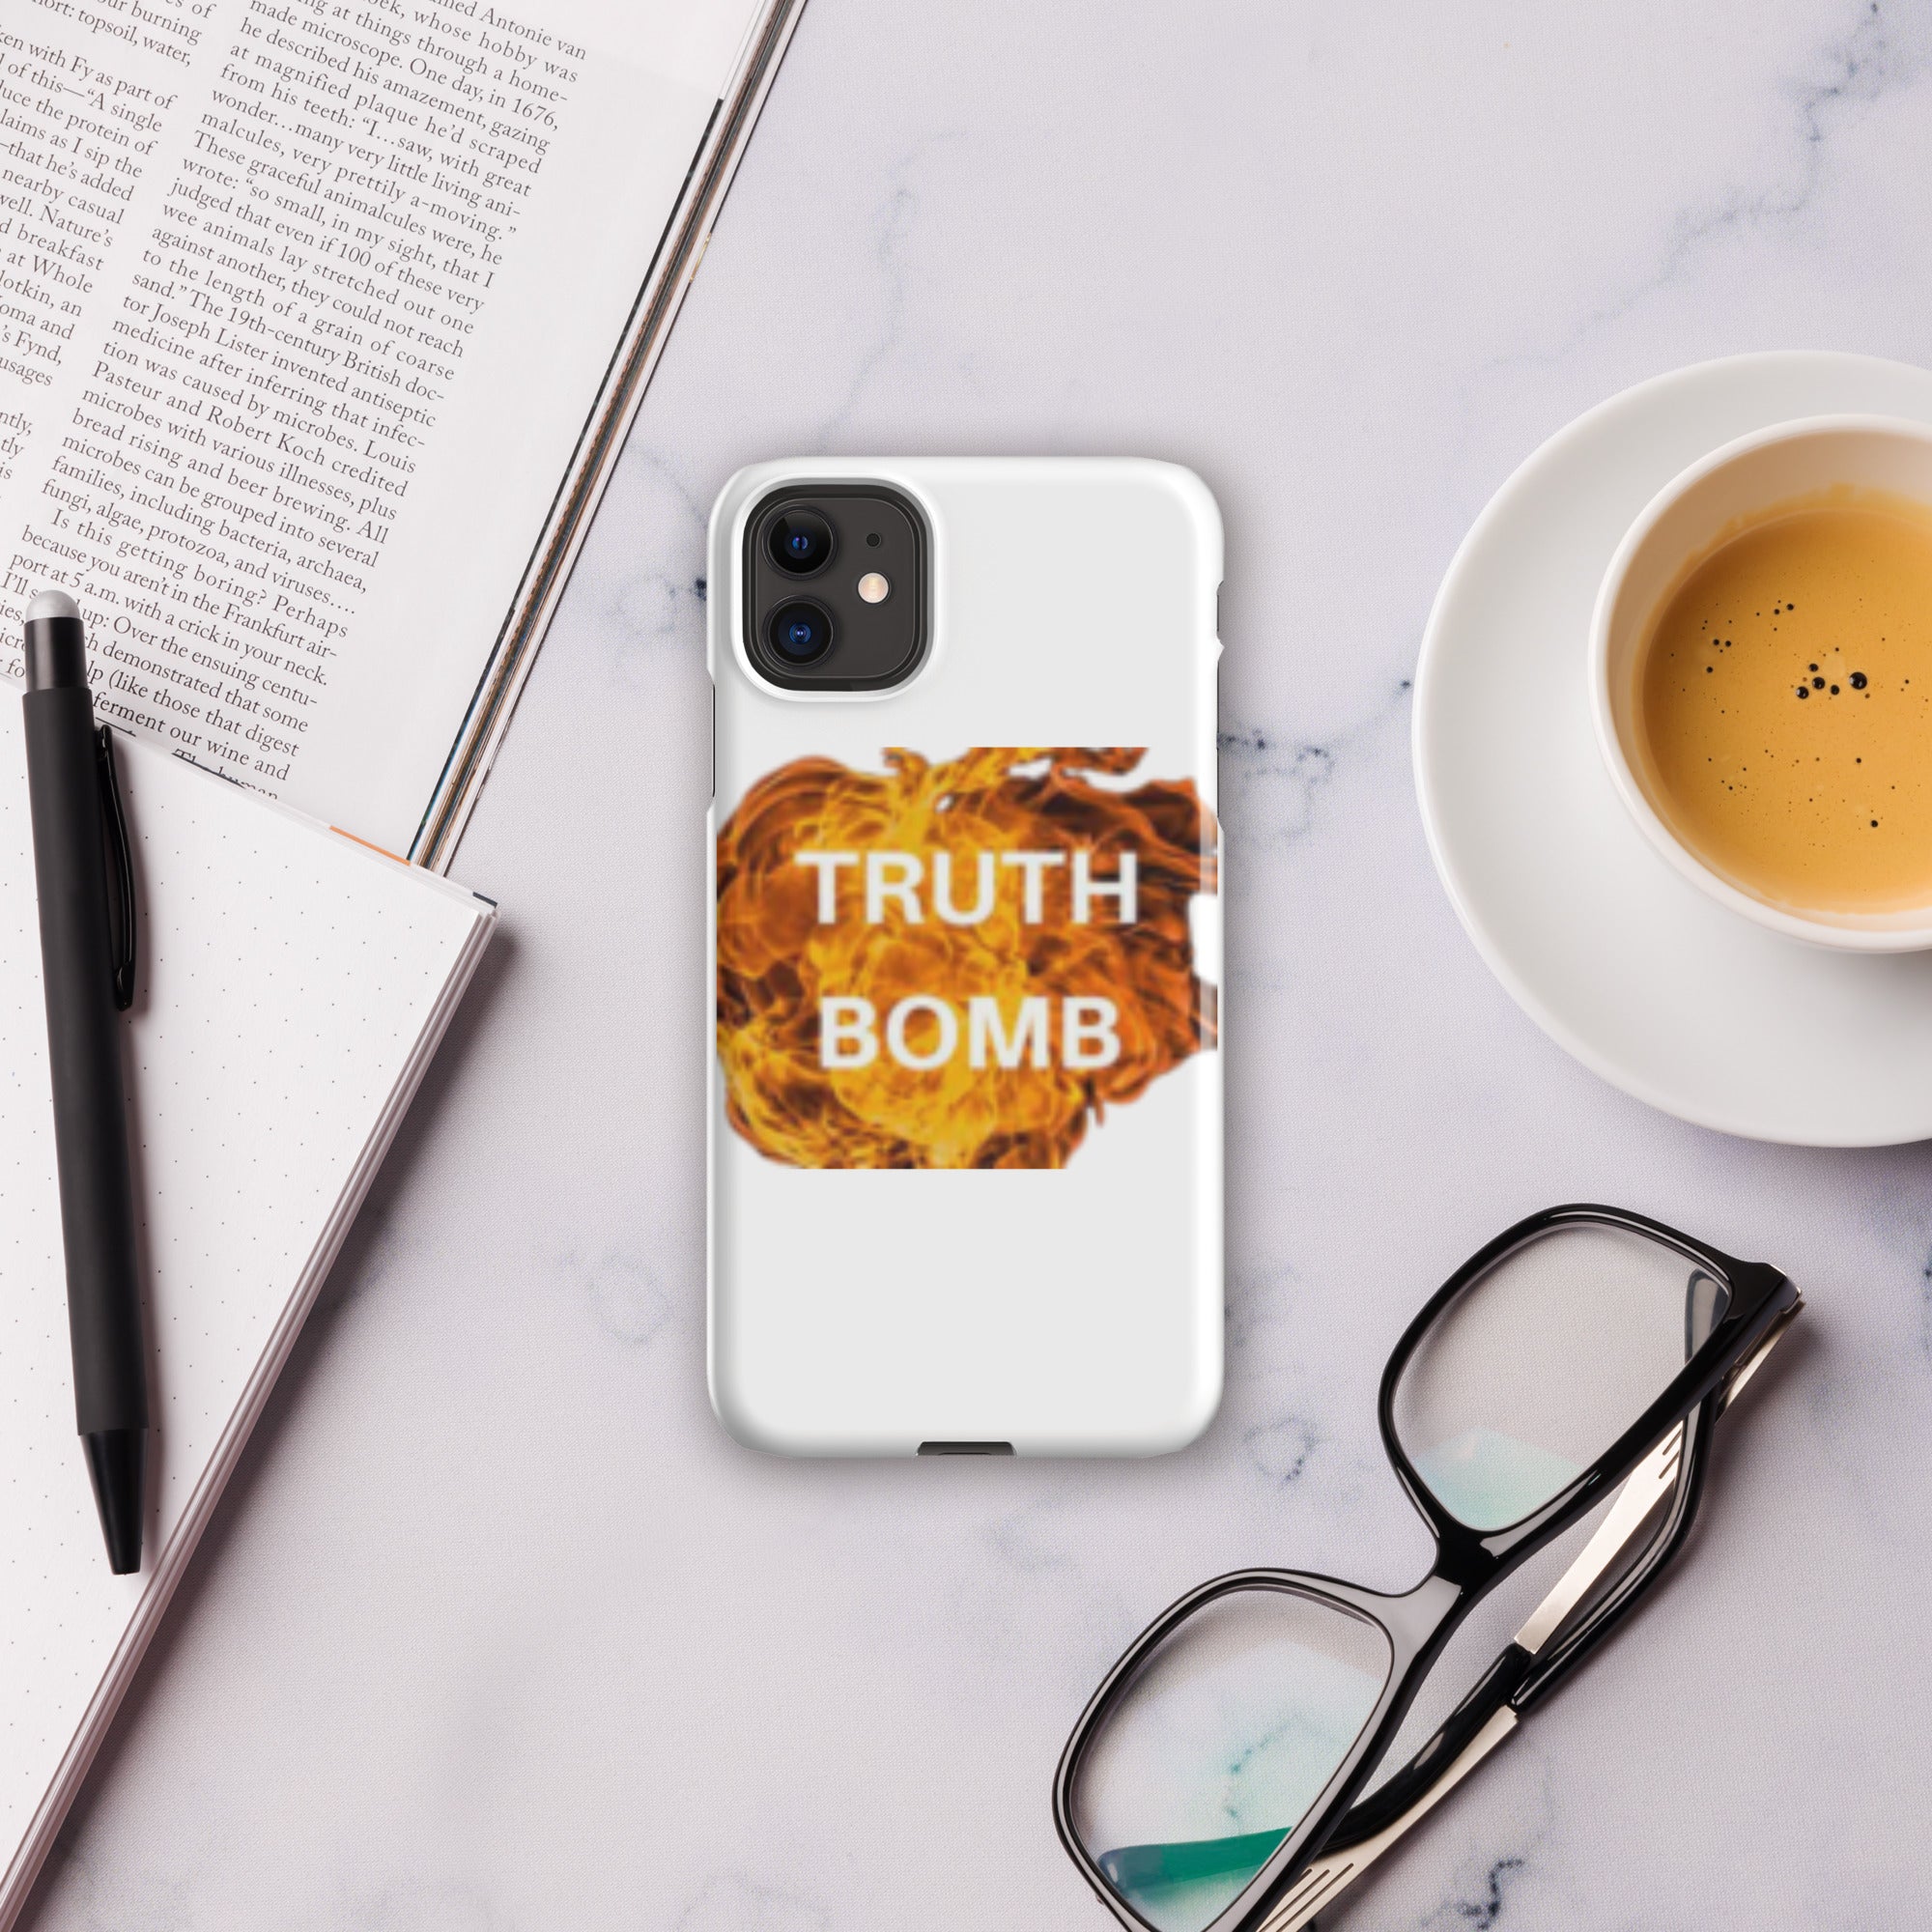 Buy Truth Bomb Snap Case for iPhone - Sleek Protection